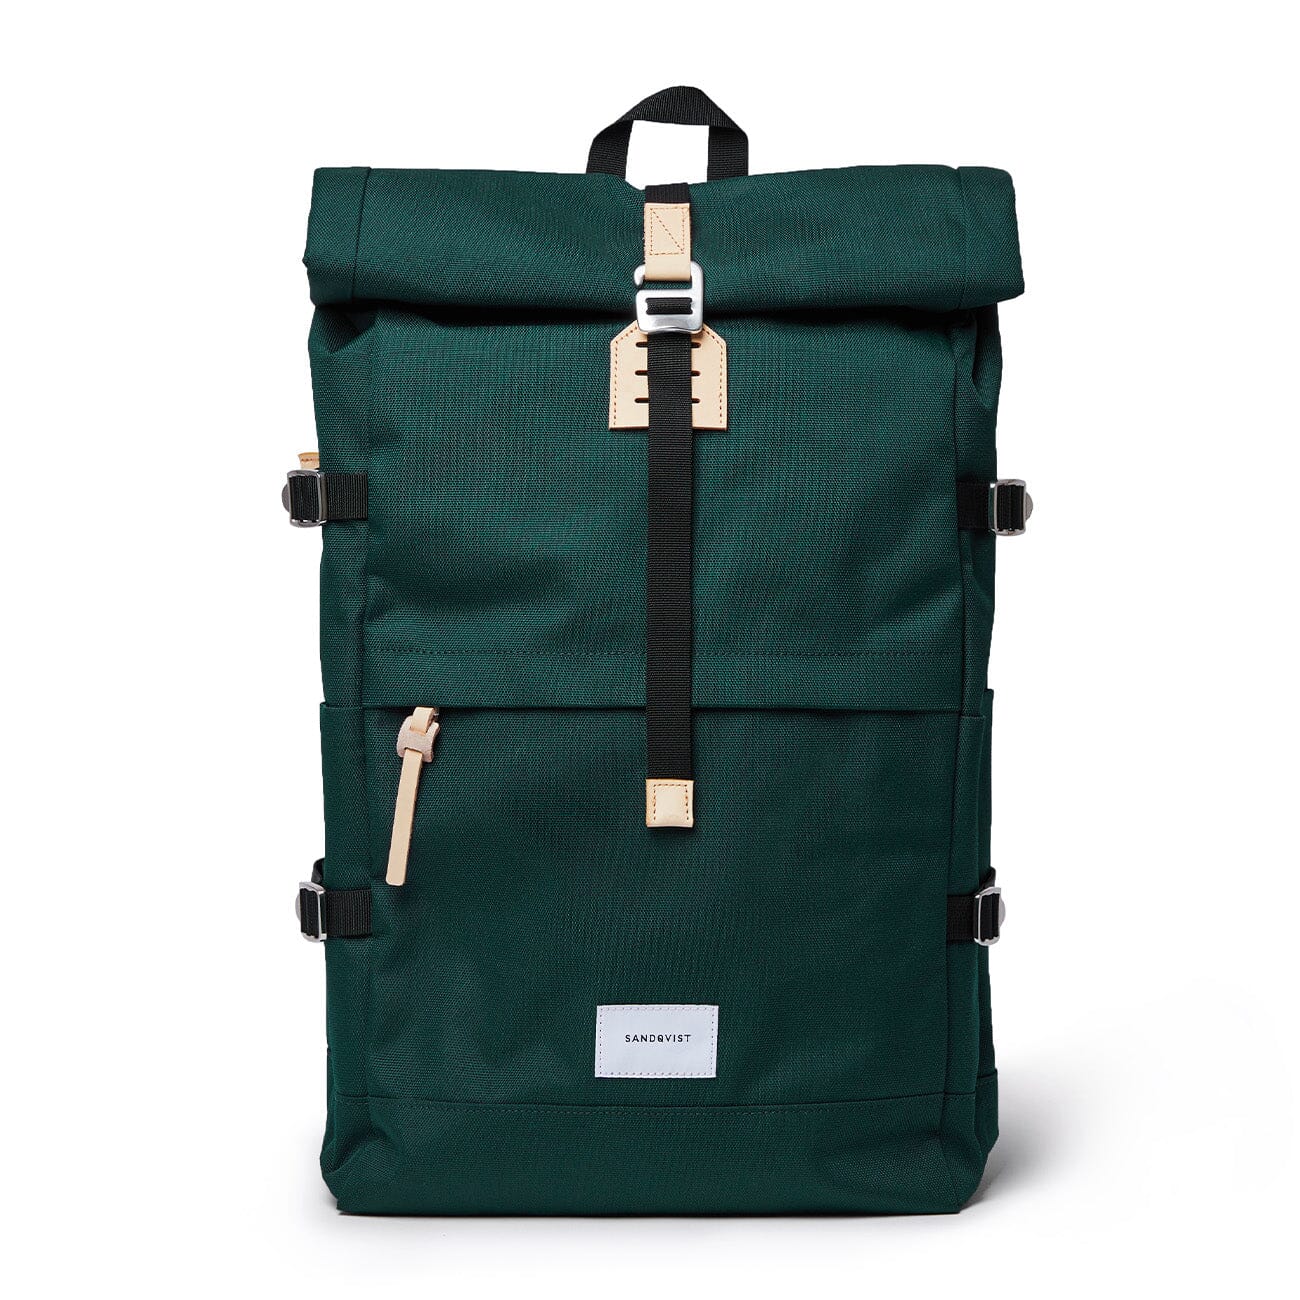 recycled urban backpack bernt sandqvist green color front view